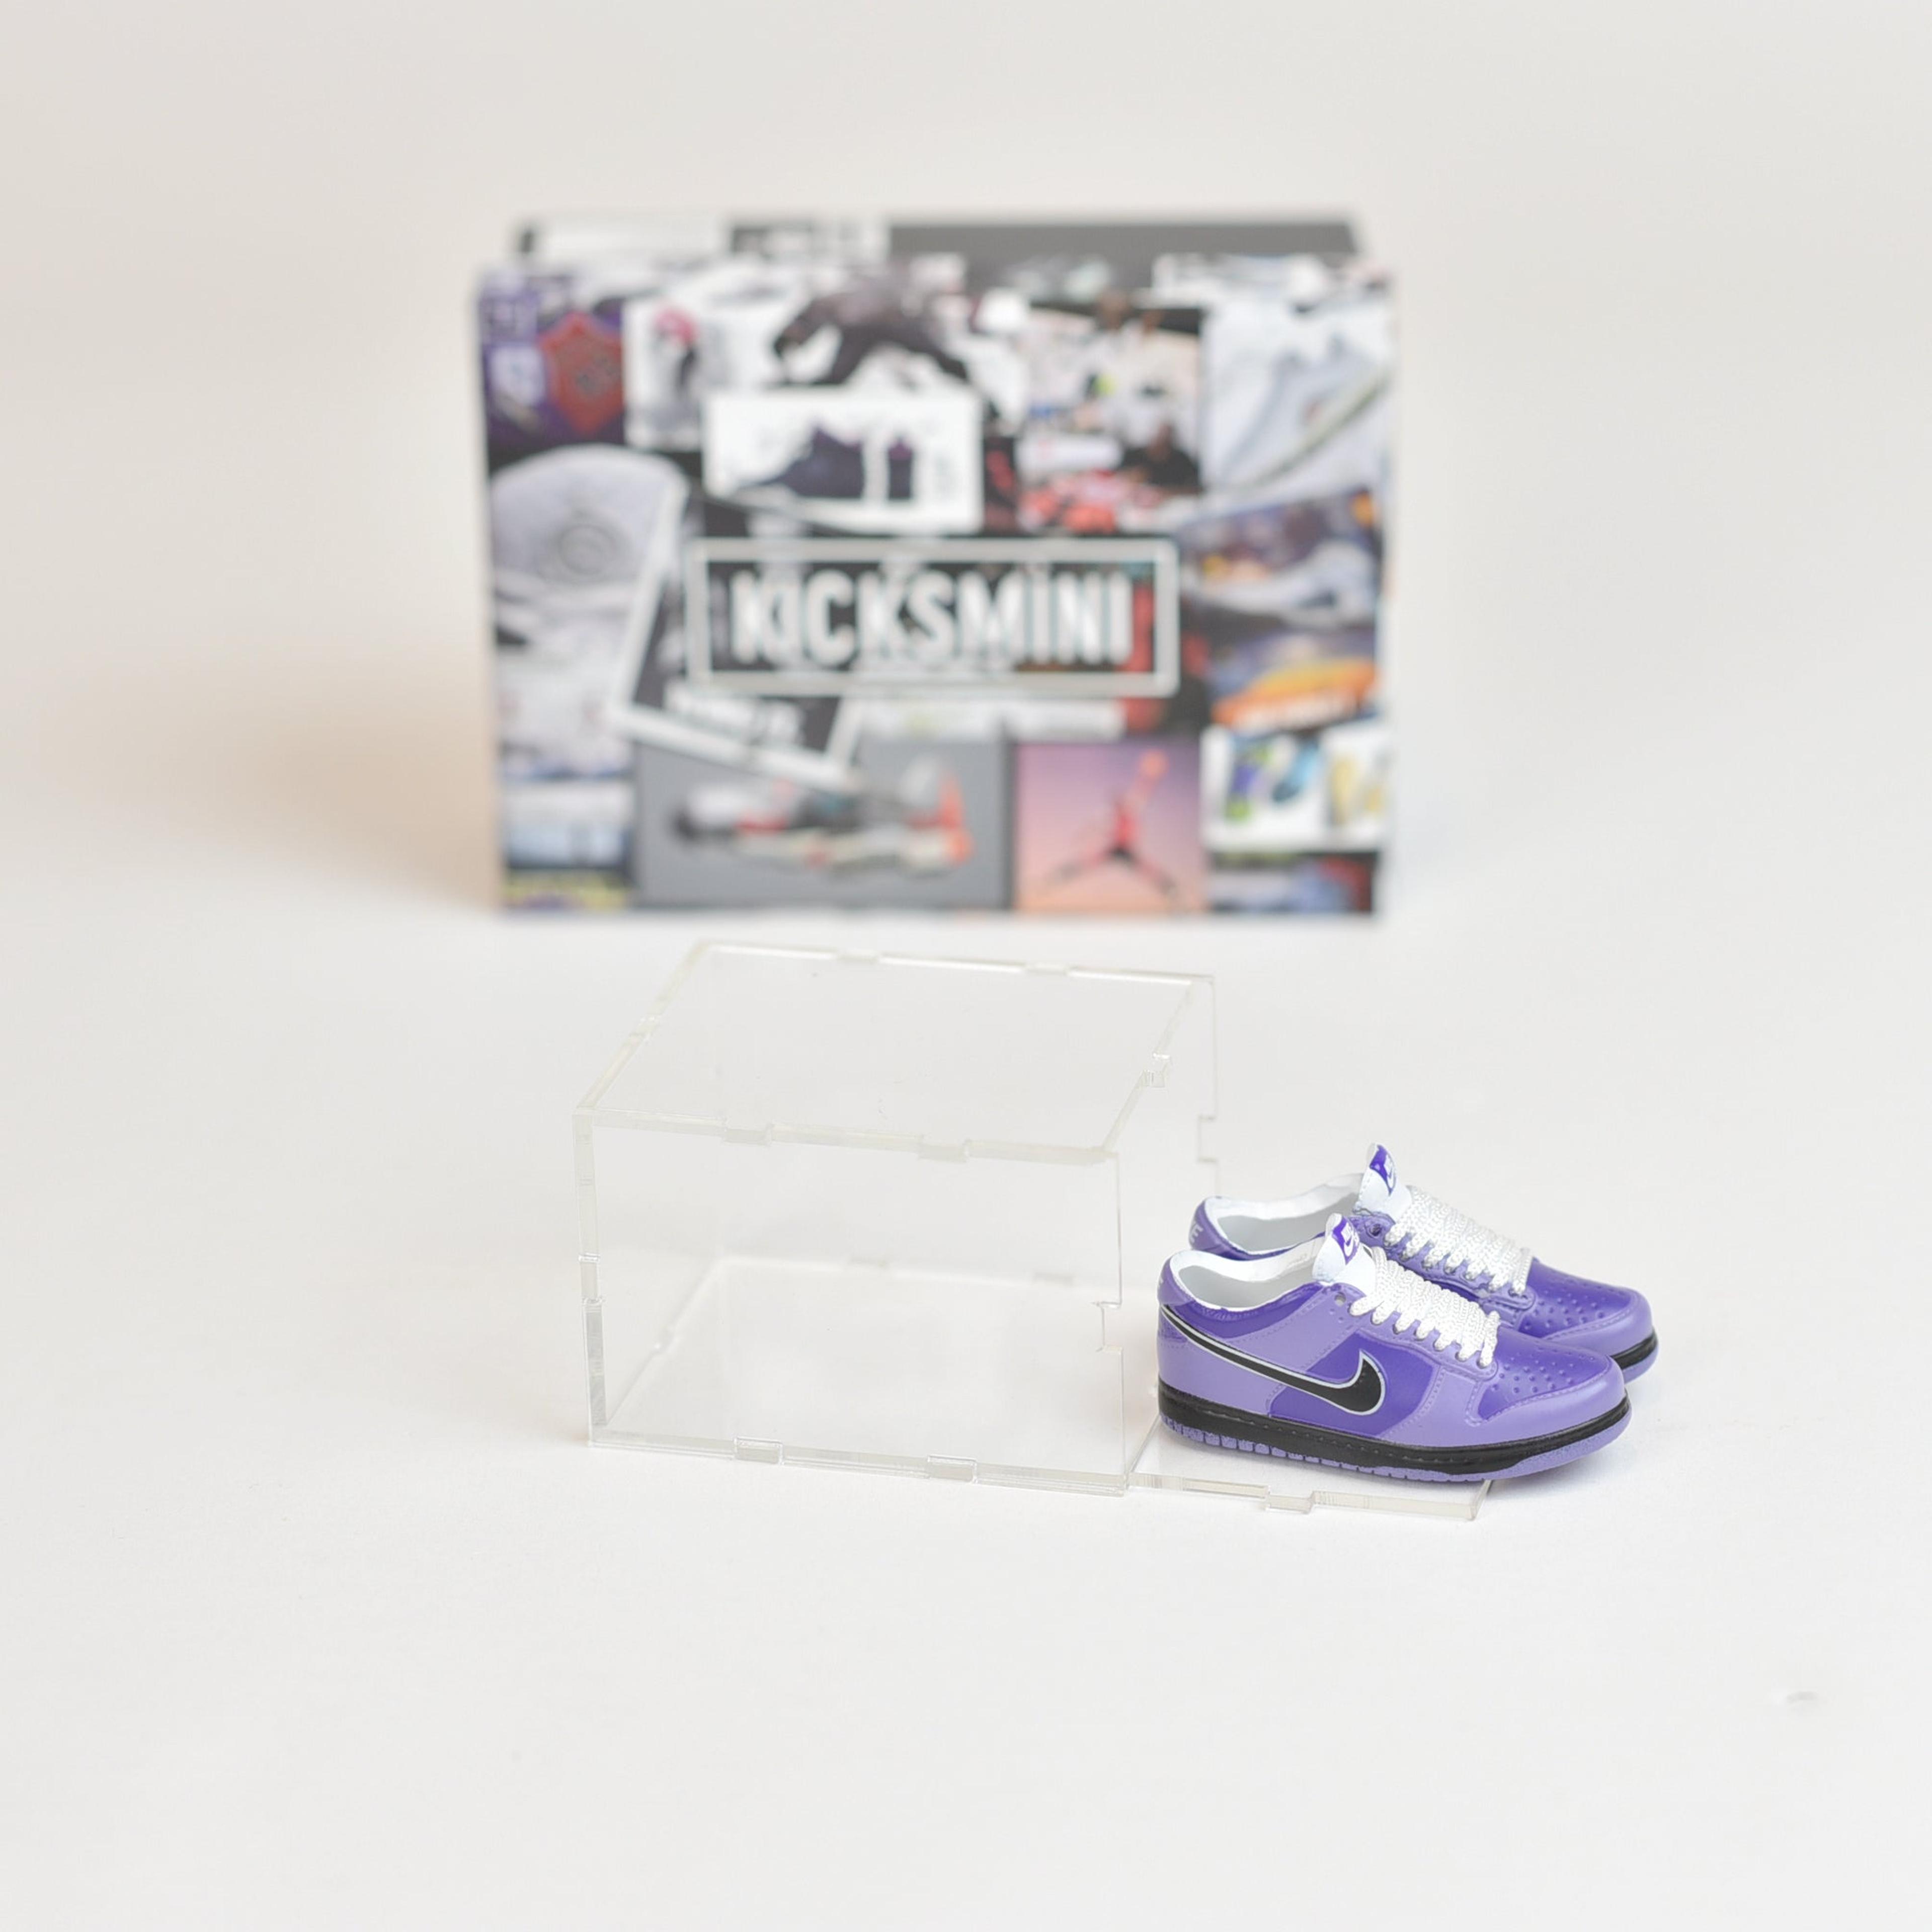 Alternate View 11 of SB Dunk Low Collaboration Mini Sneakers with Display Case